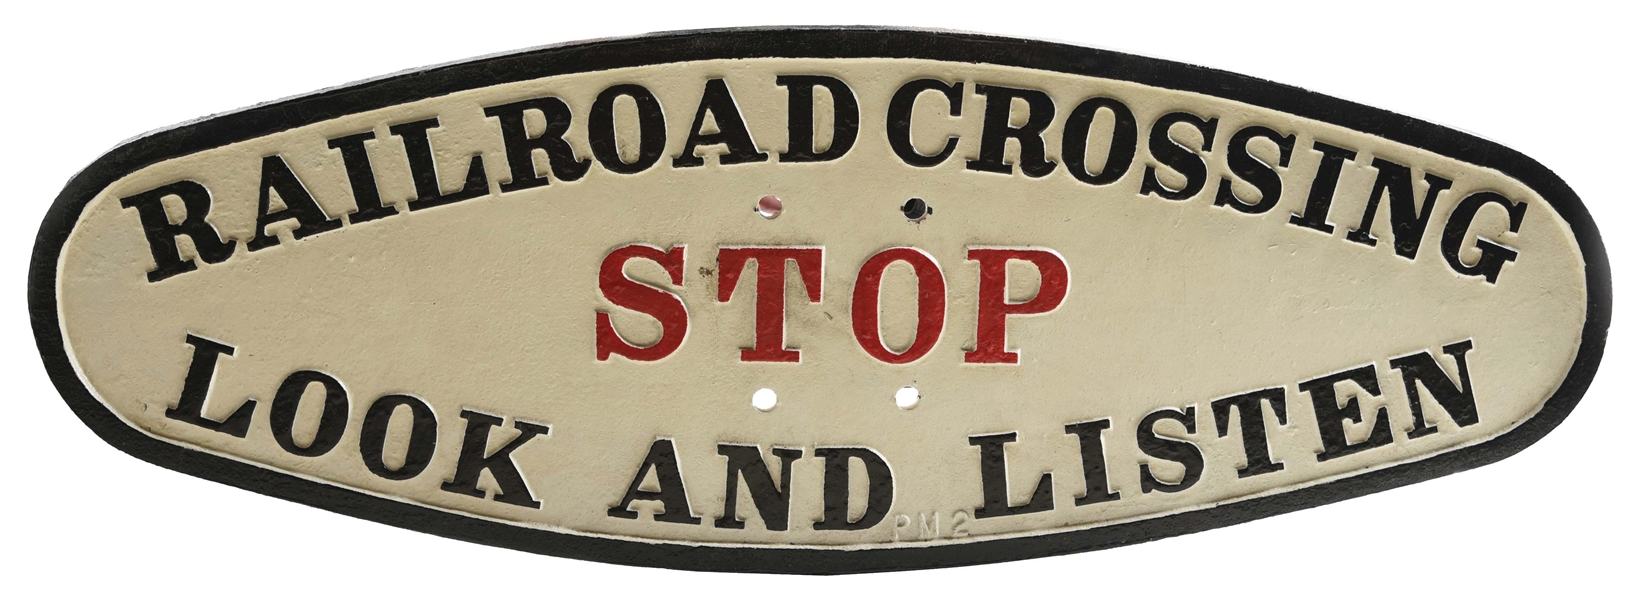 OVAL POLE-MOUNTED CAST IRON RAILROAD CROSSING SIGN.